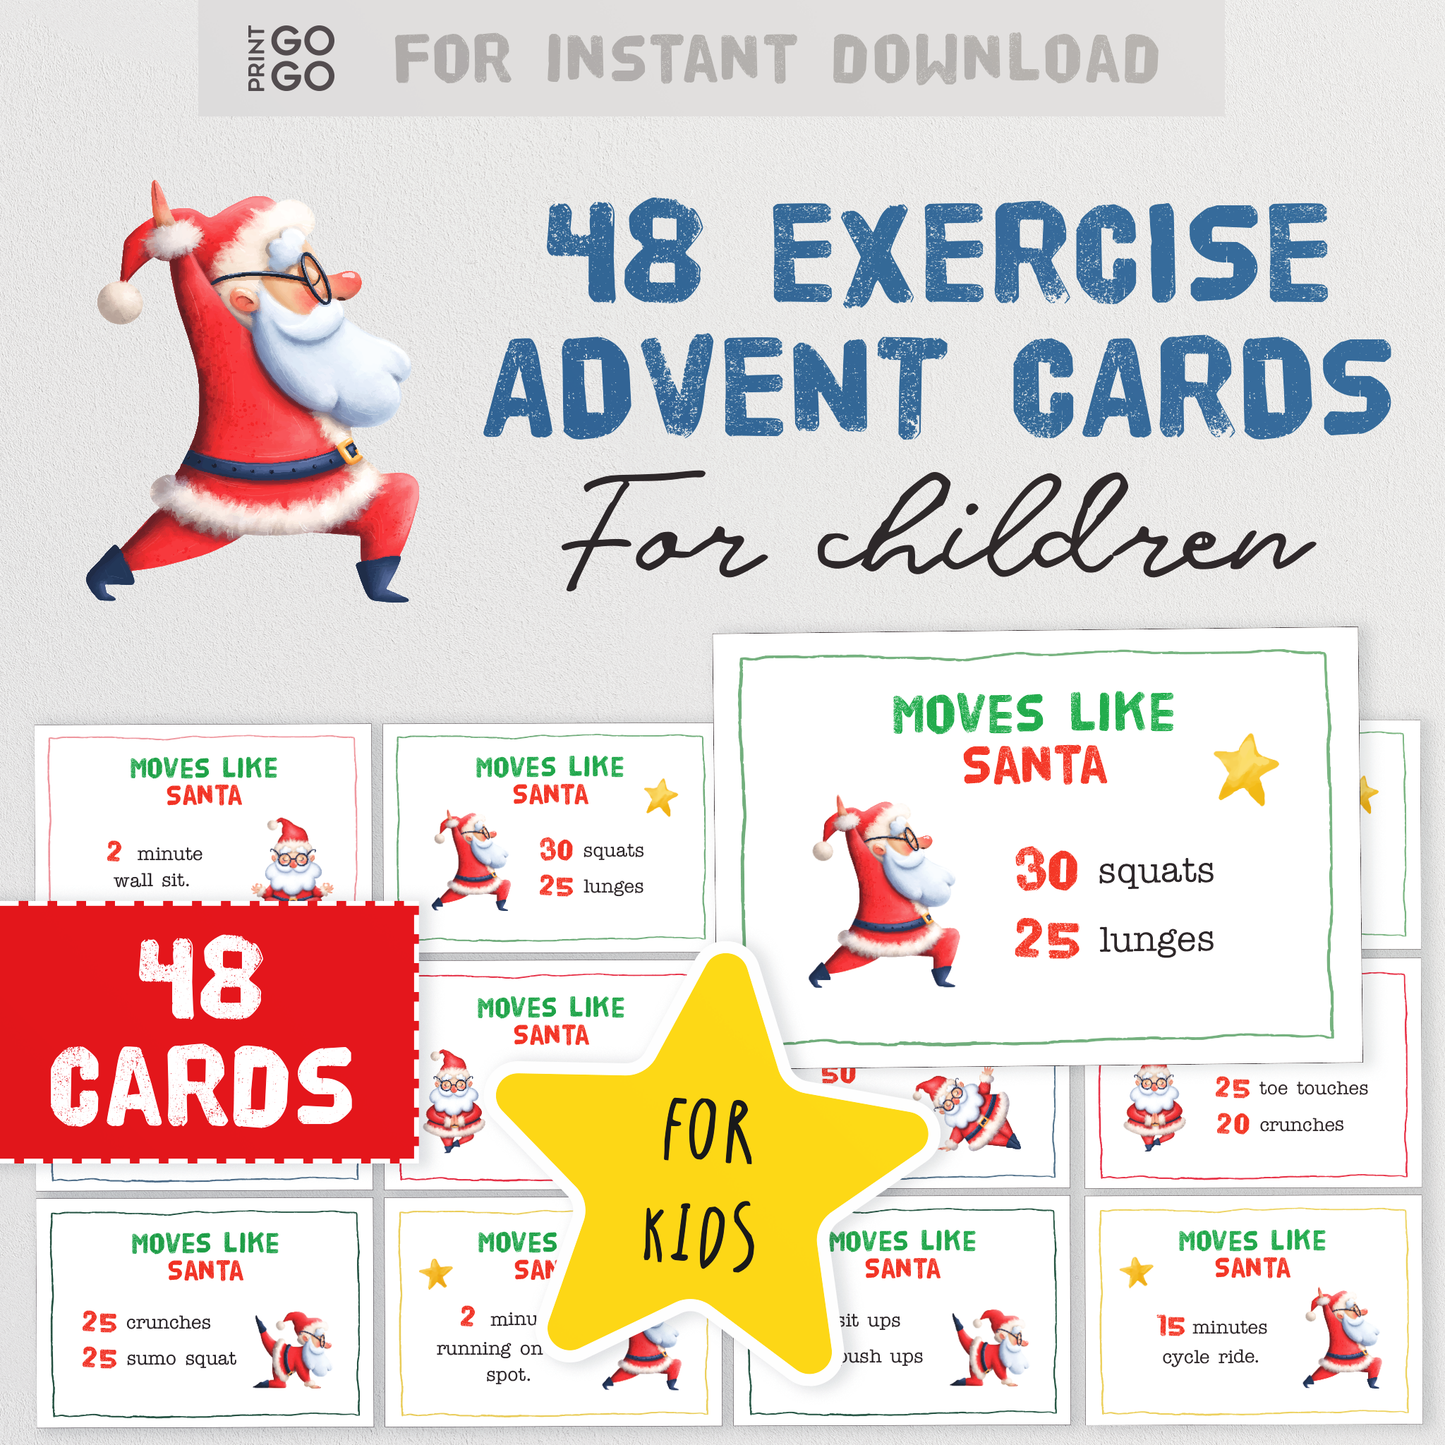 48 Exercise Advent Cards - Keep Moving and Countdown Christmas! | Unique Advent Activity Cards | Xmas Ideas for Kids | Holiday Printable